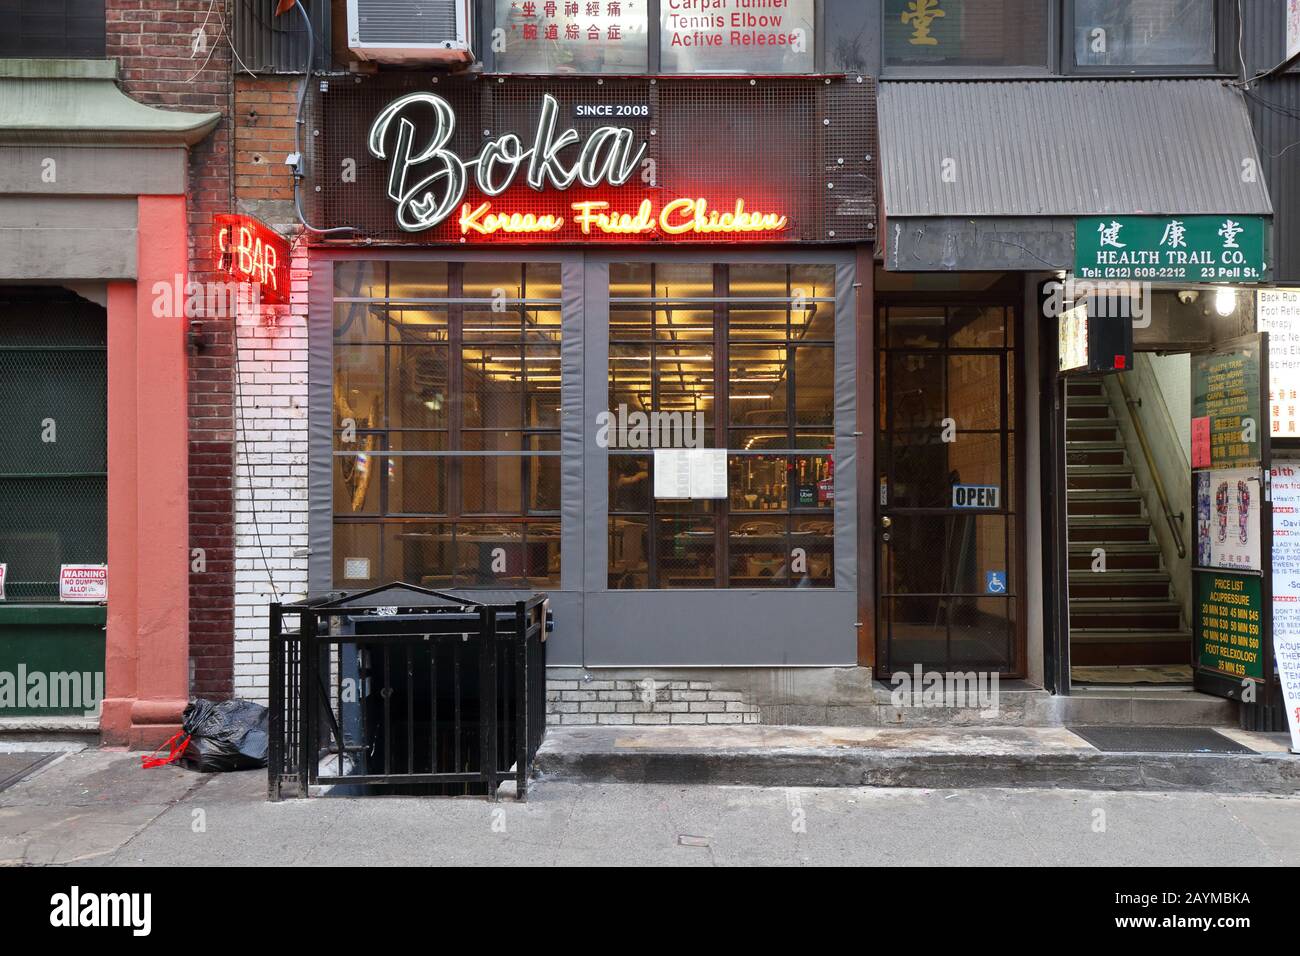 [historical storefront] Boka, 23 Pell St, New York, NYC storefront photo of a Korean fried chicken restaurant and bar in Manhattan Chinatown. Stock Photo